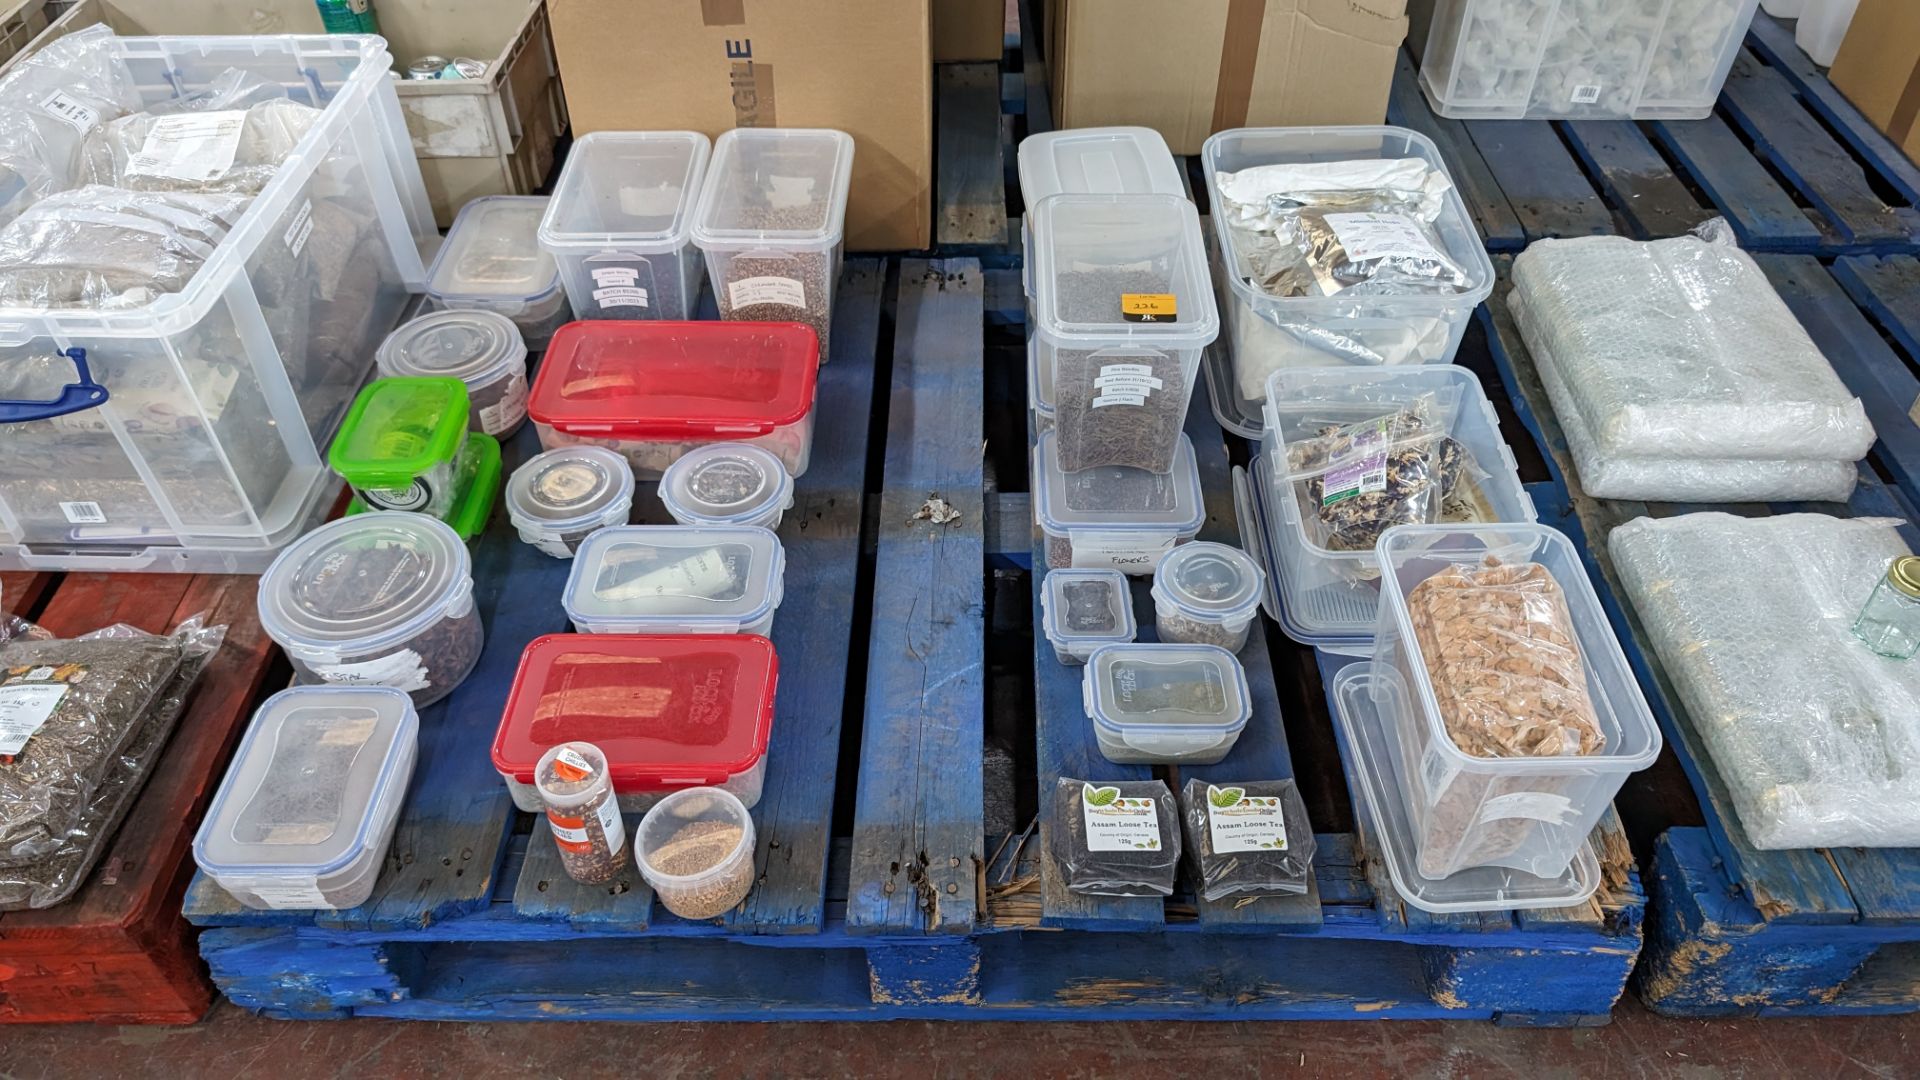 The contents of a pallet of assorted aromats and other dried ingredients, including the tubs/crates